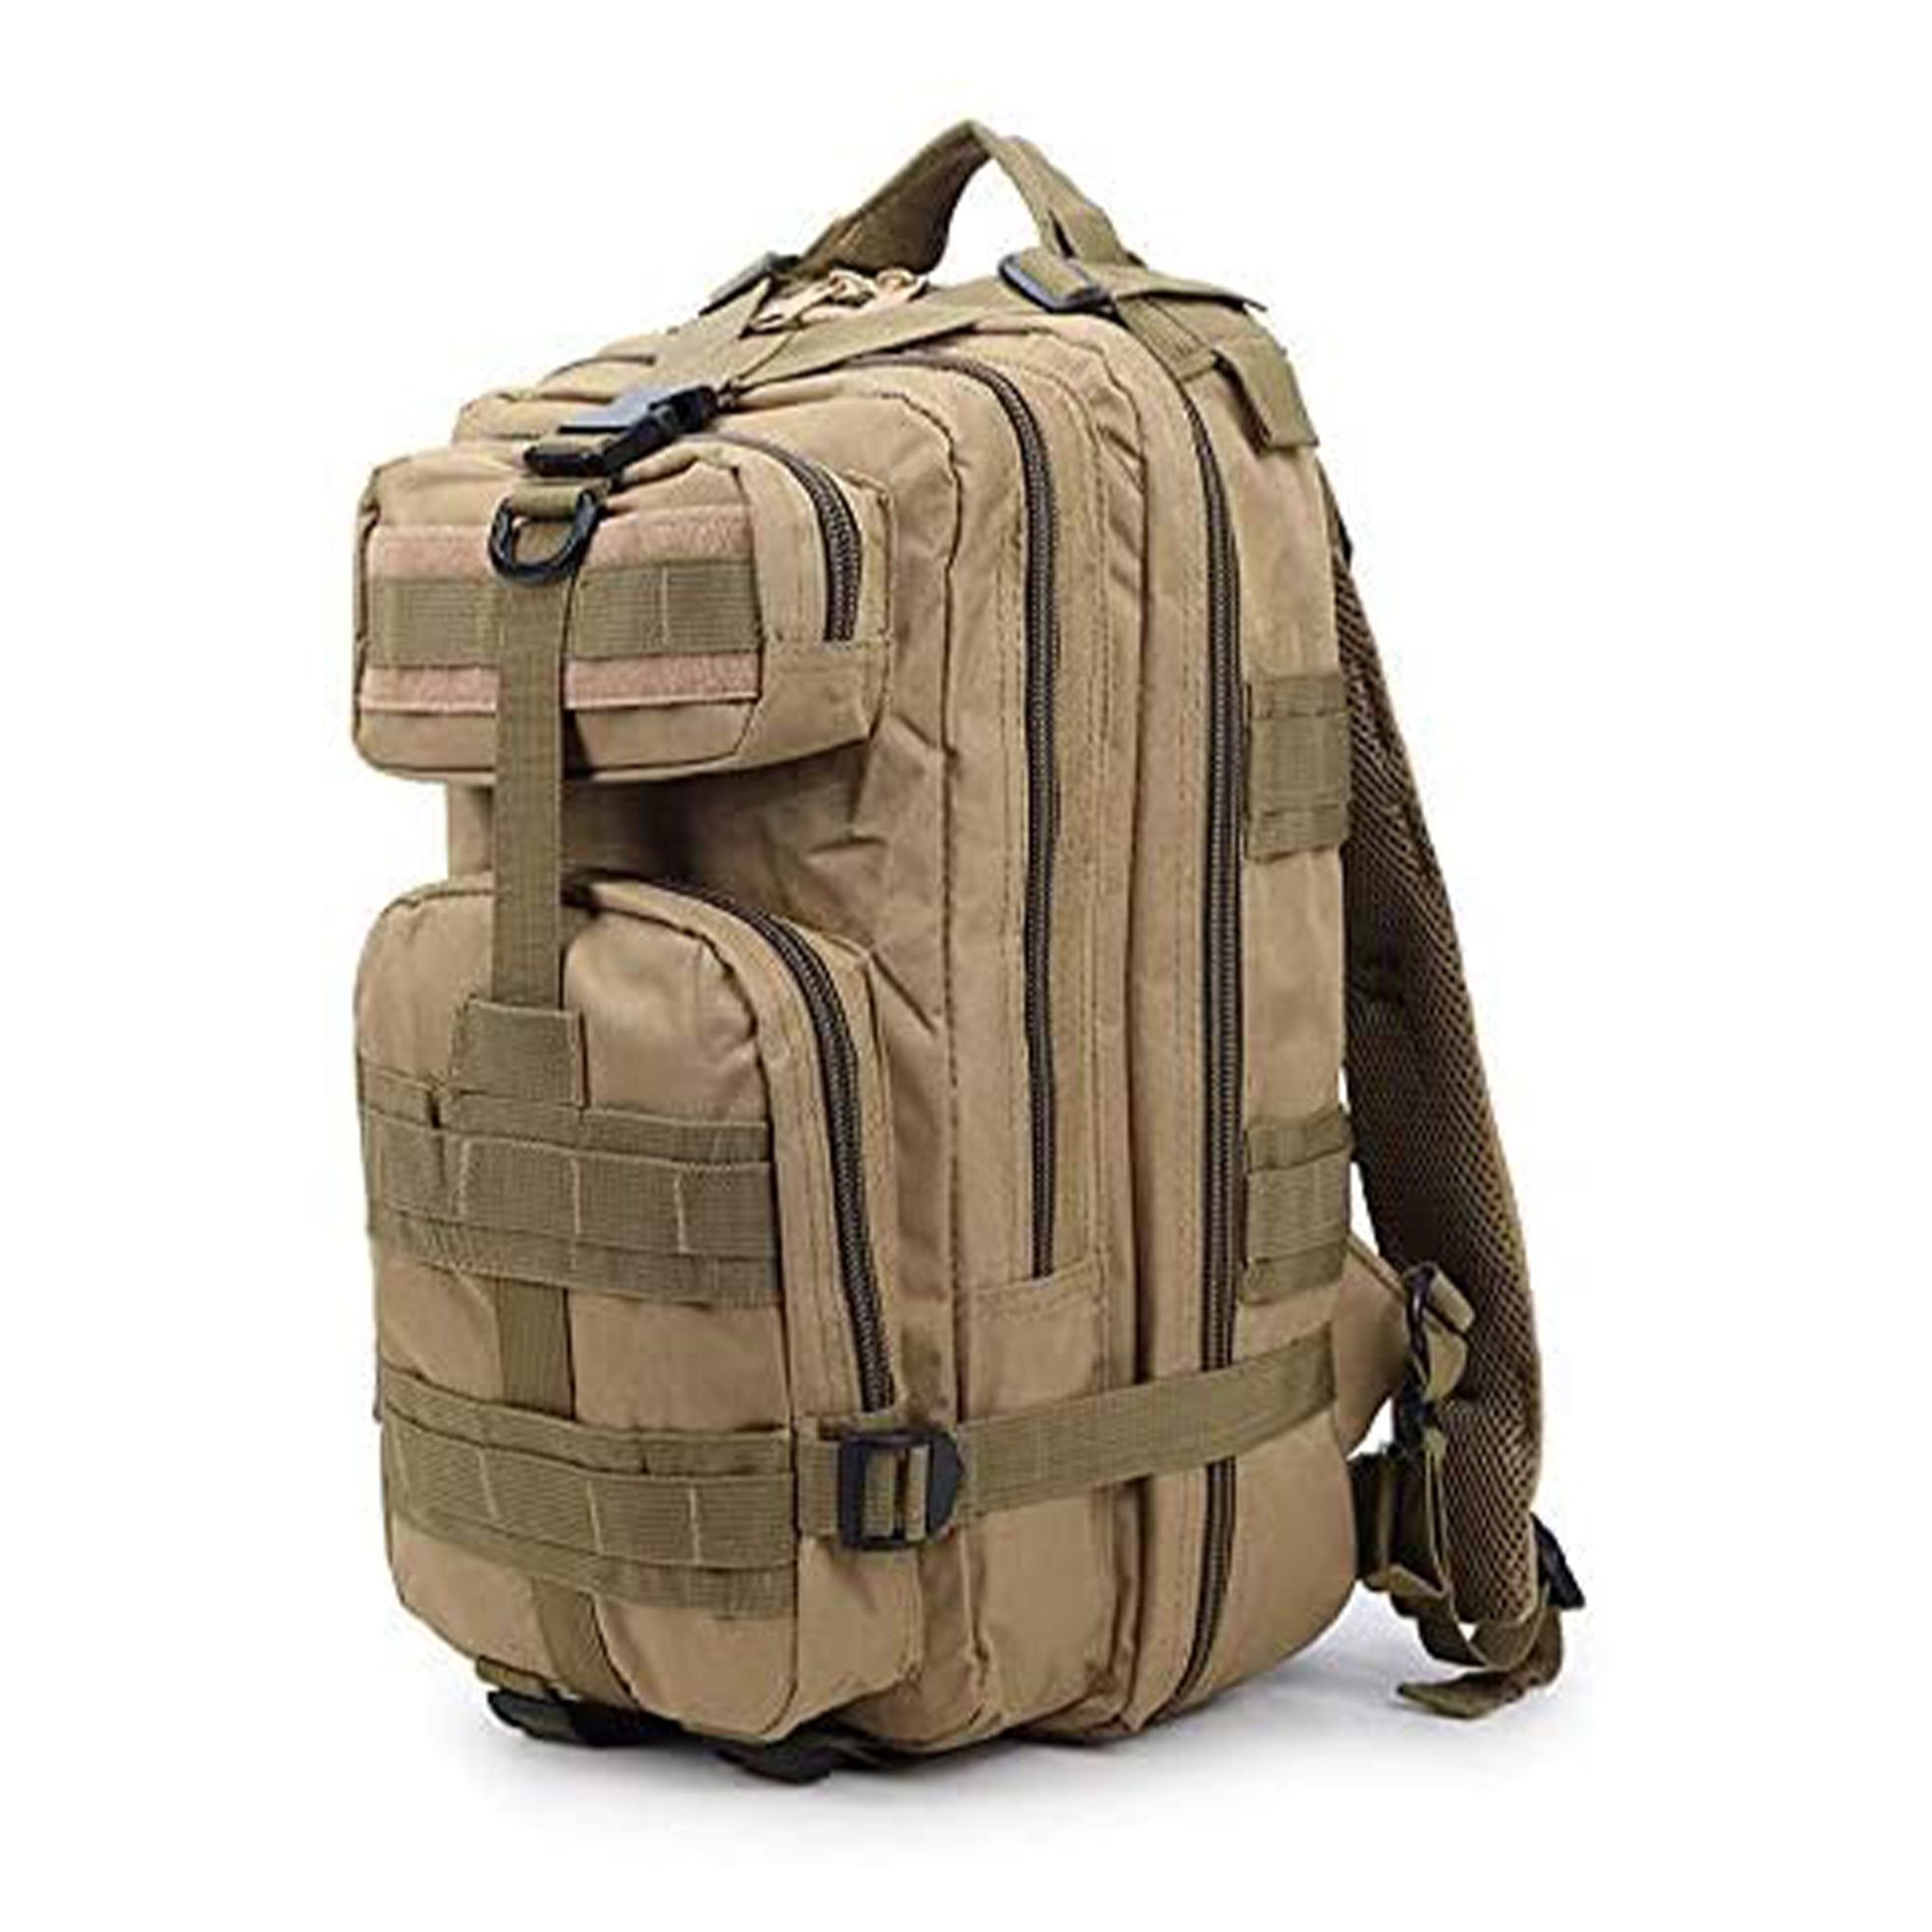 Black Outdoor Tactical Military Molle Bag Rucksack Backpack Camping Hiking Sport 